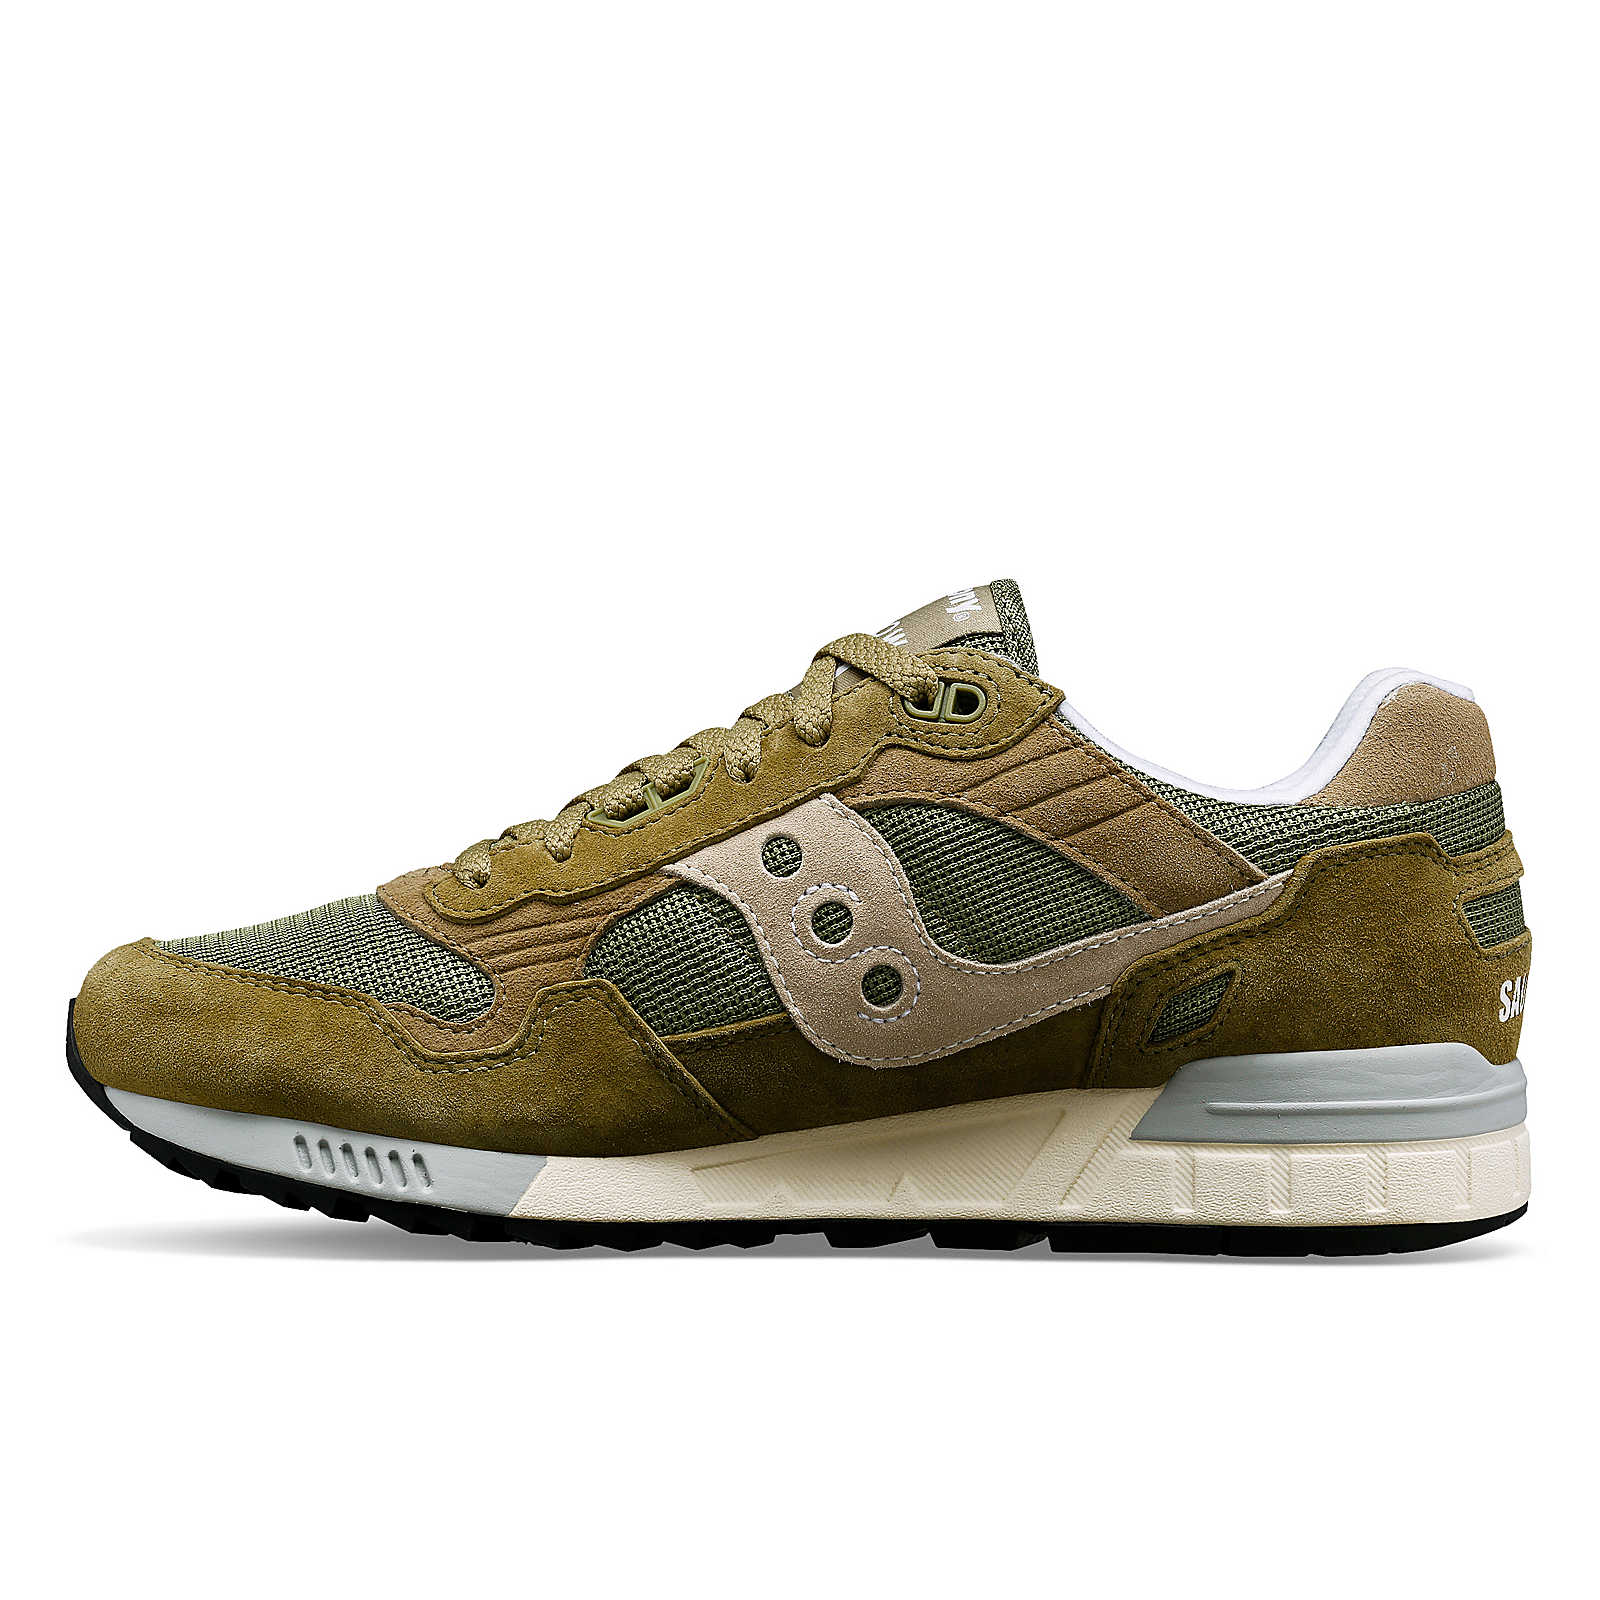 Saucony Mens Shadow 5000 Trainers - Sage Green